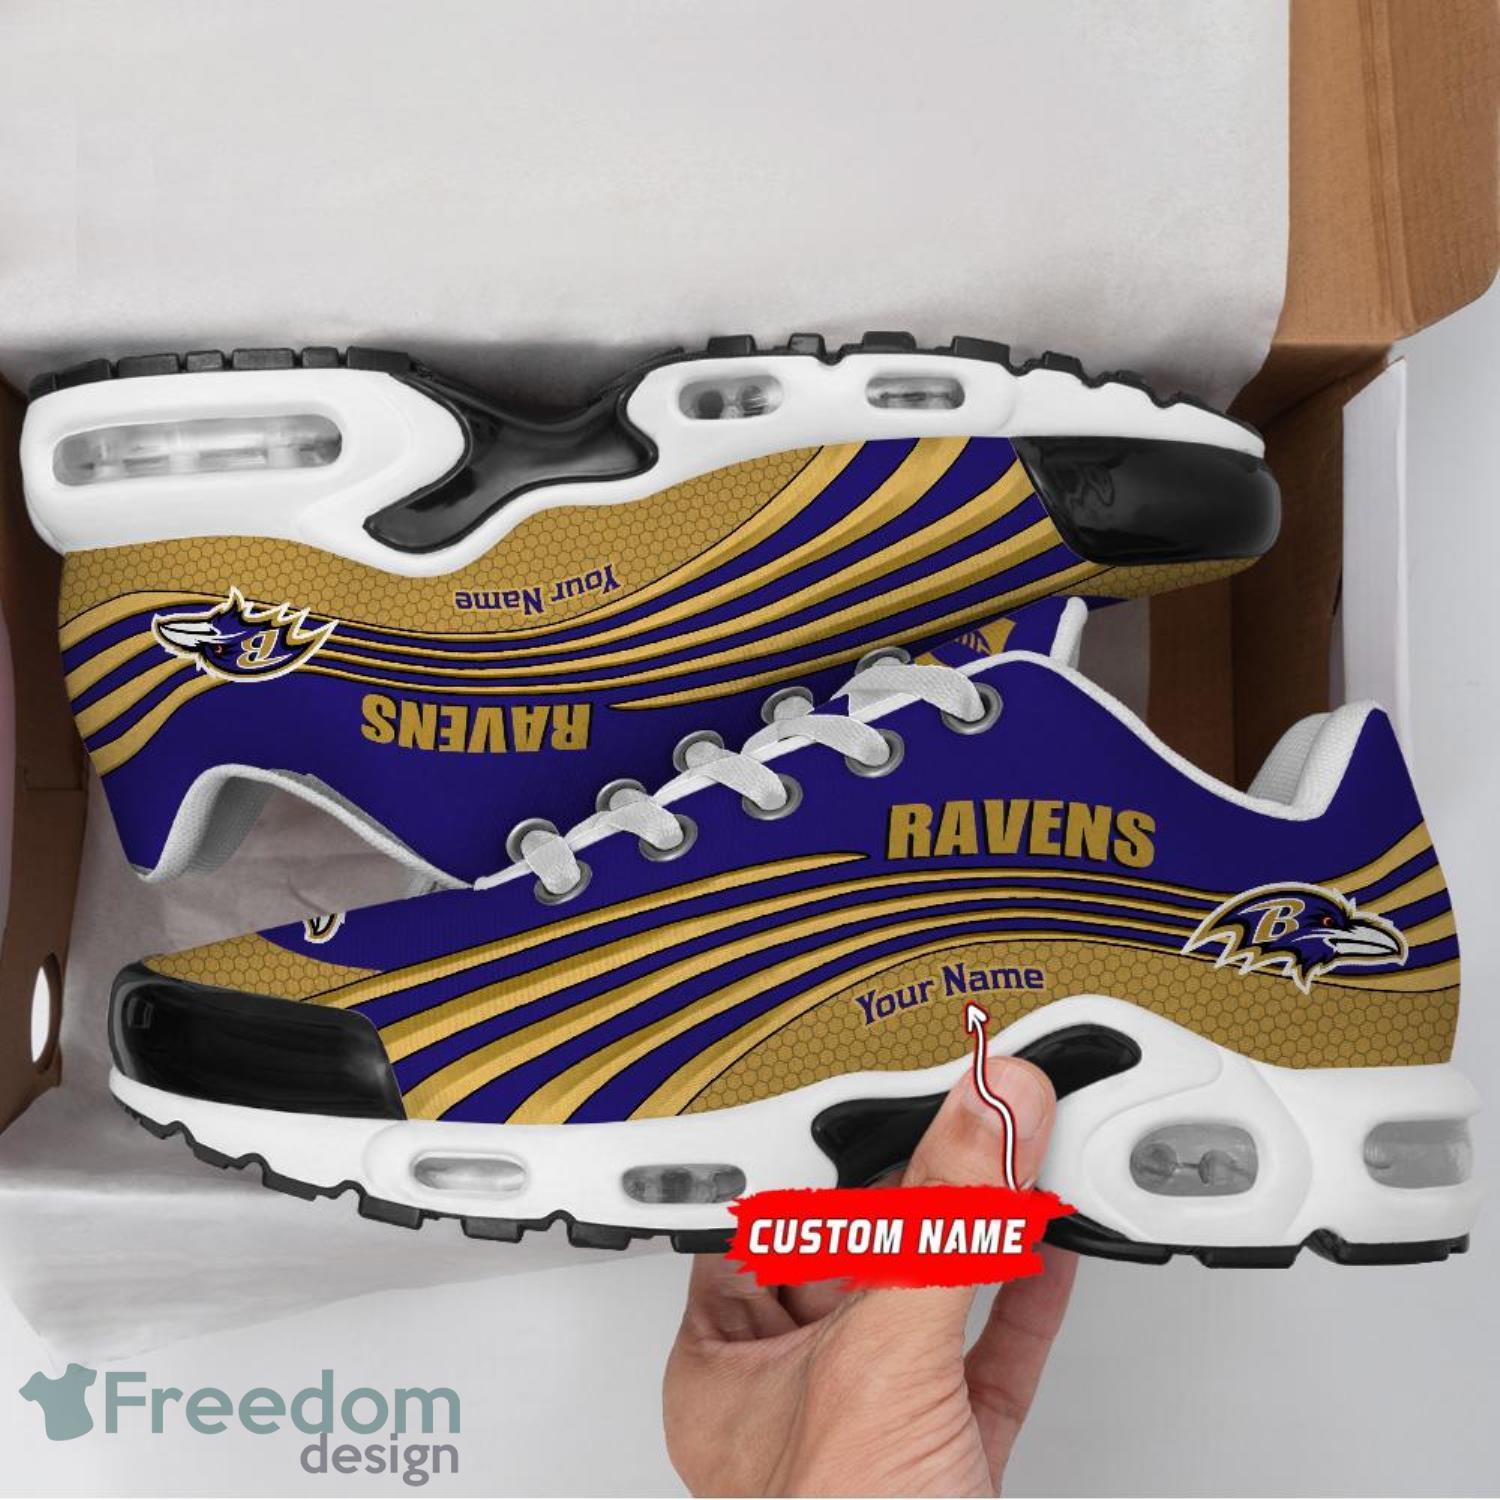 Limited Edition] NFL Baltimore Ravens Custom Nike Air Force Sneakers